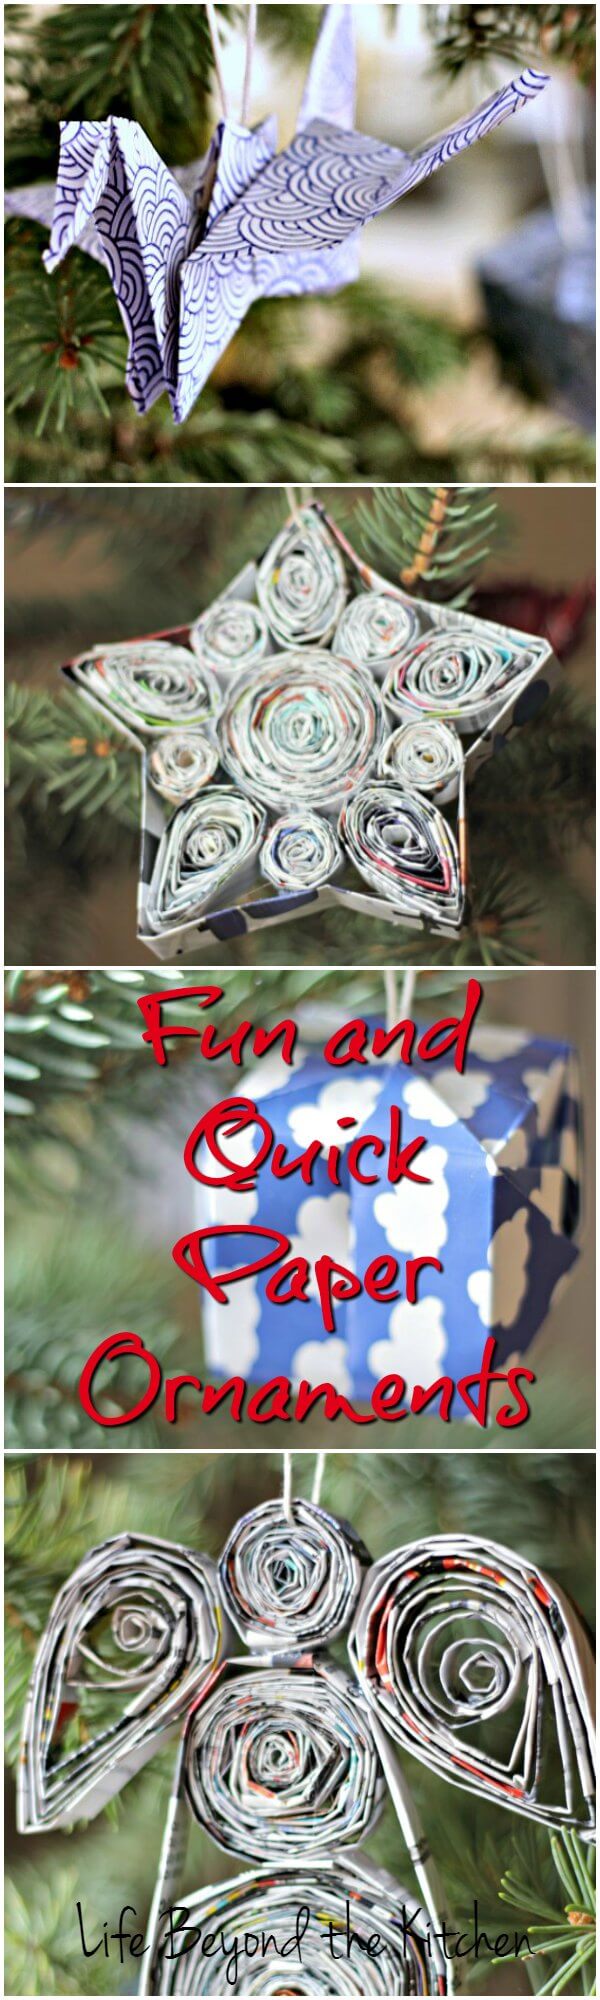 Quick Paper Ornaments You Can Make Tonight!